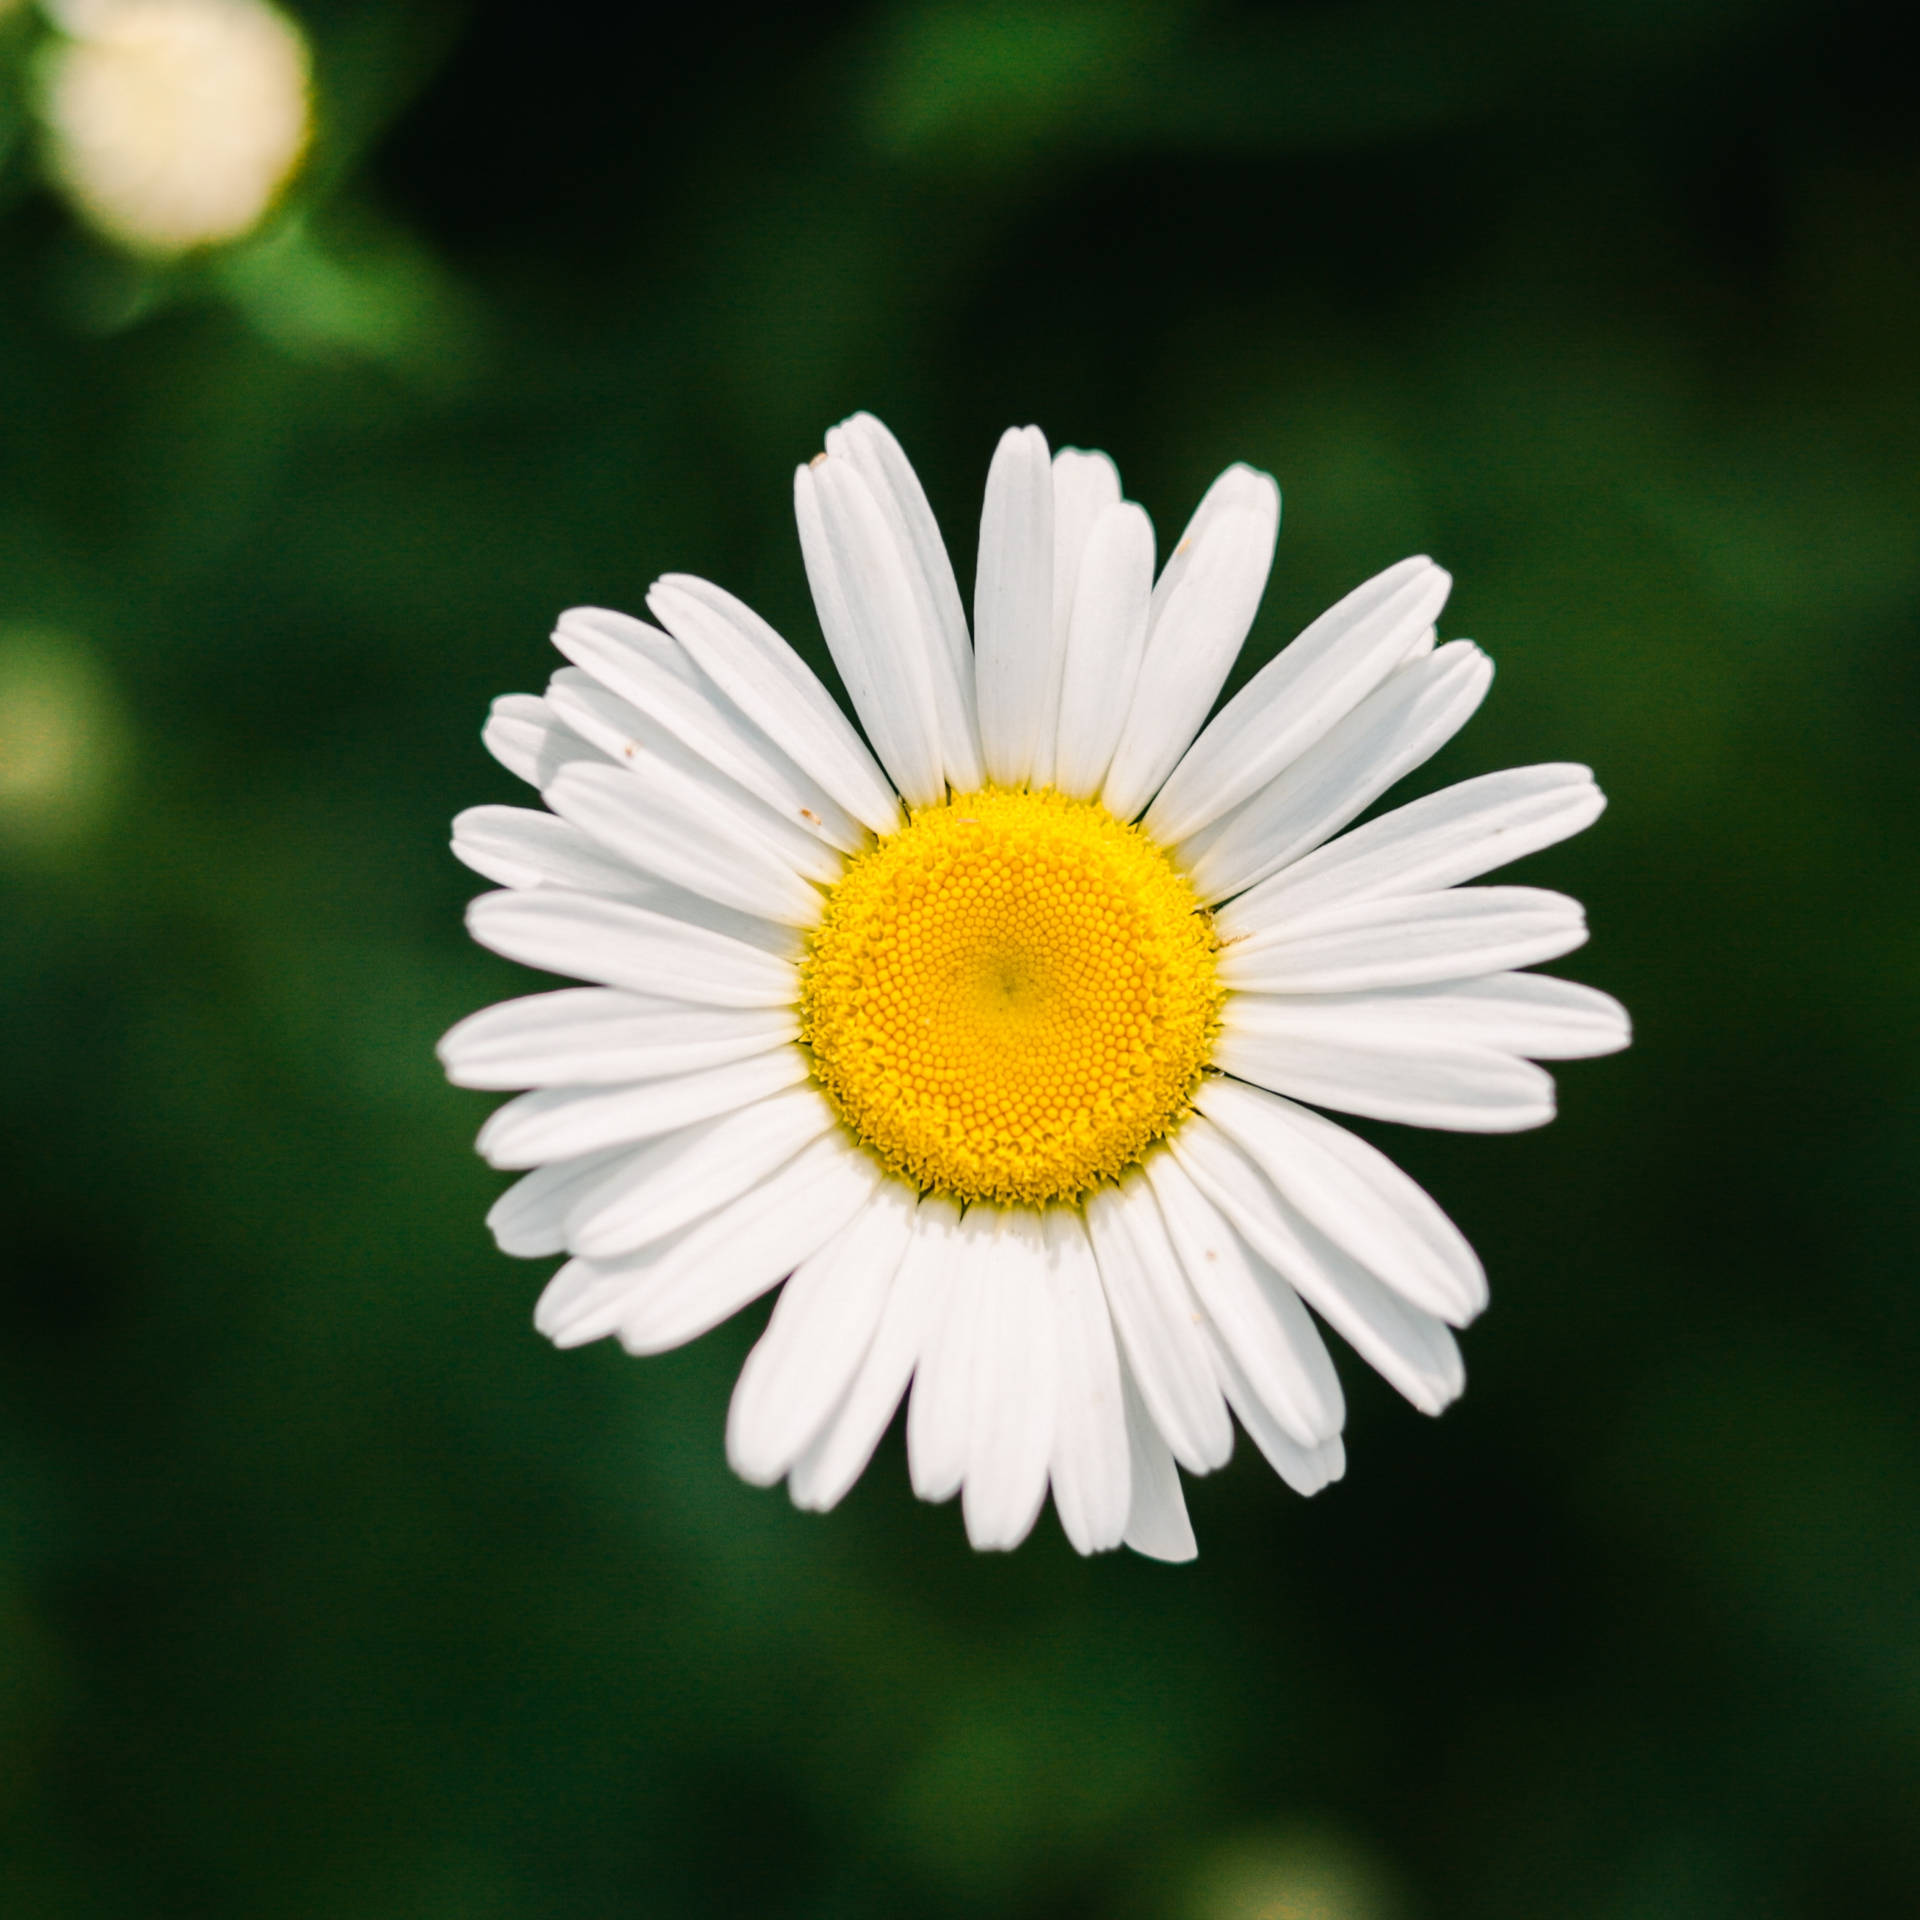 Daisy 2774X2774 Wallpaper and Background Image